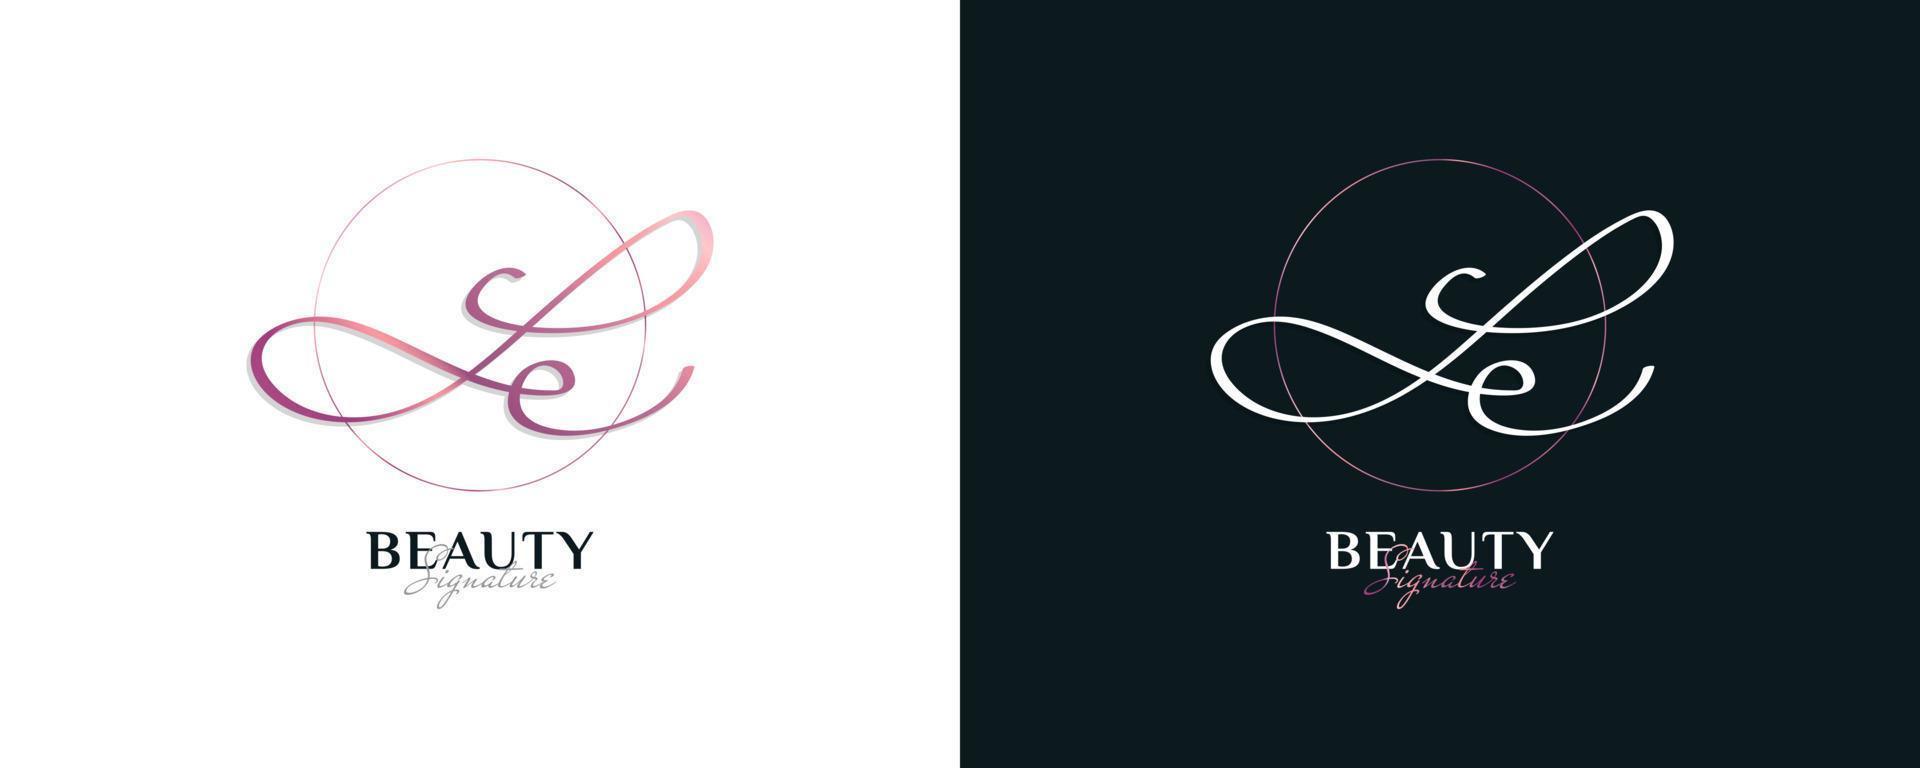 JE Initial Signature Logo Design with Elegant and Minimalist Handwriting Style. Initial J and E Logo Design for Wedding, Fashion, Jewelry, Boutique and Business Brand Identity vector